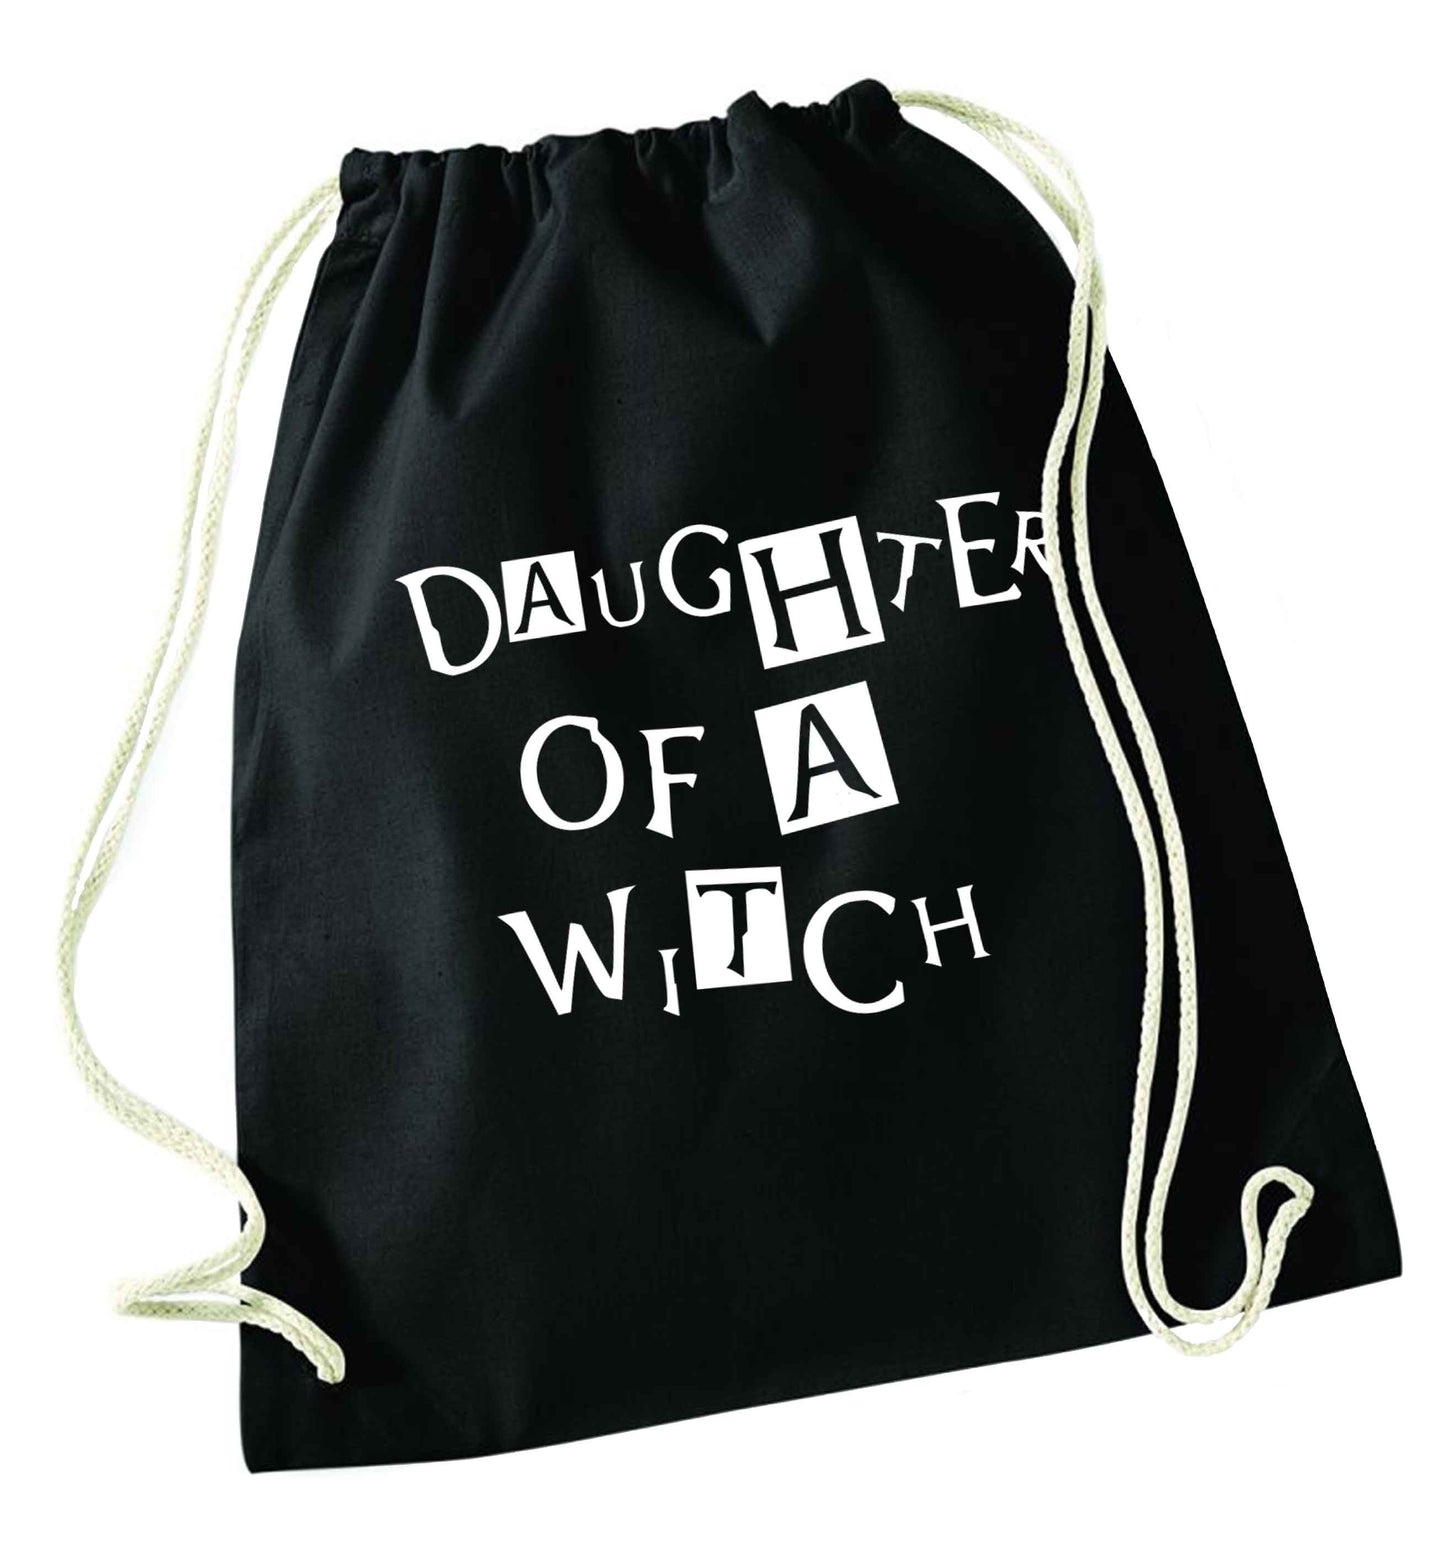 Daughter of a witch black drawstring bag